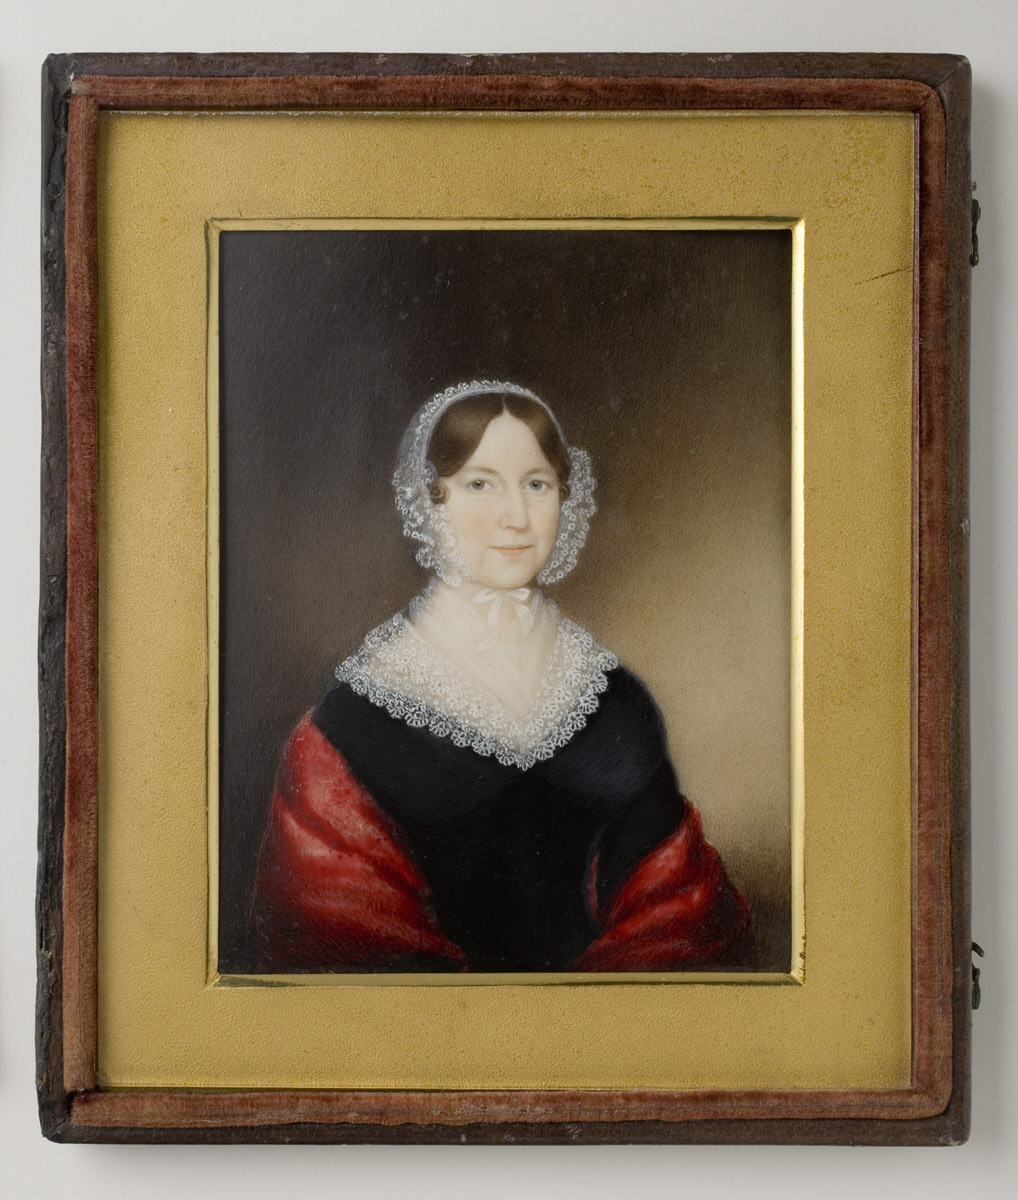 Join us Wednesday, November 17th at 12:30pm for our next Zip Zoom Tour. Docent Deb Wallace will share some of the Portrait Miniatures in WAM's collection. Register for this free interactive program with the link below. ow.ly/Uexm50GNeIv 'Elizabeth Tuckerman Salisbury'